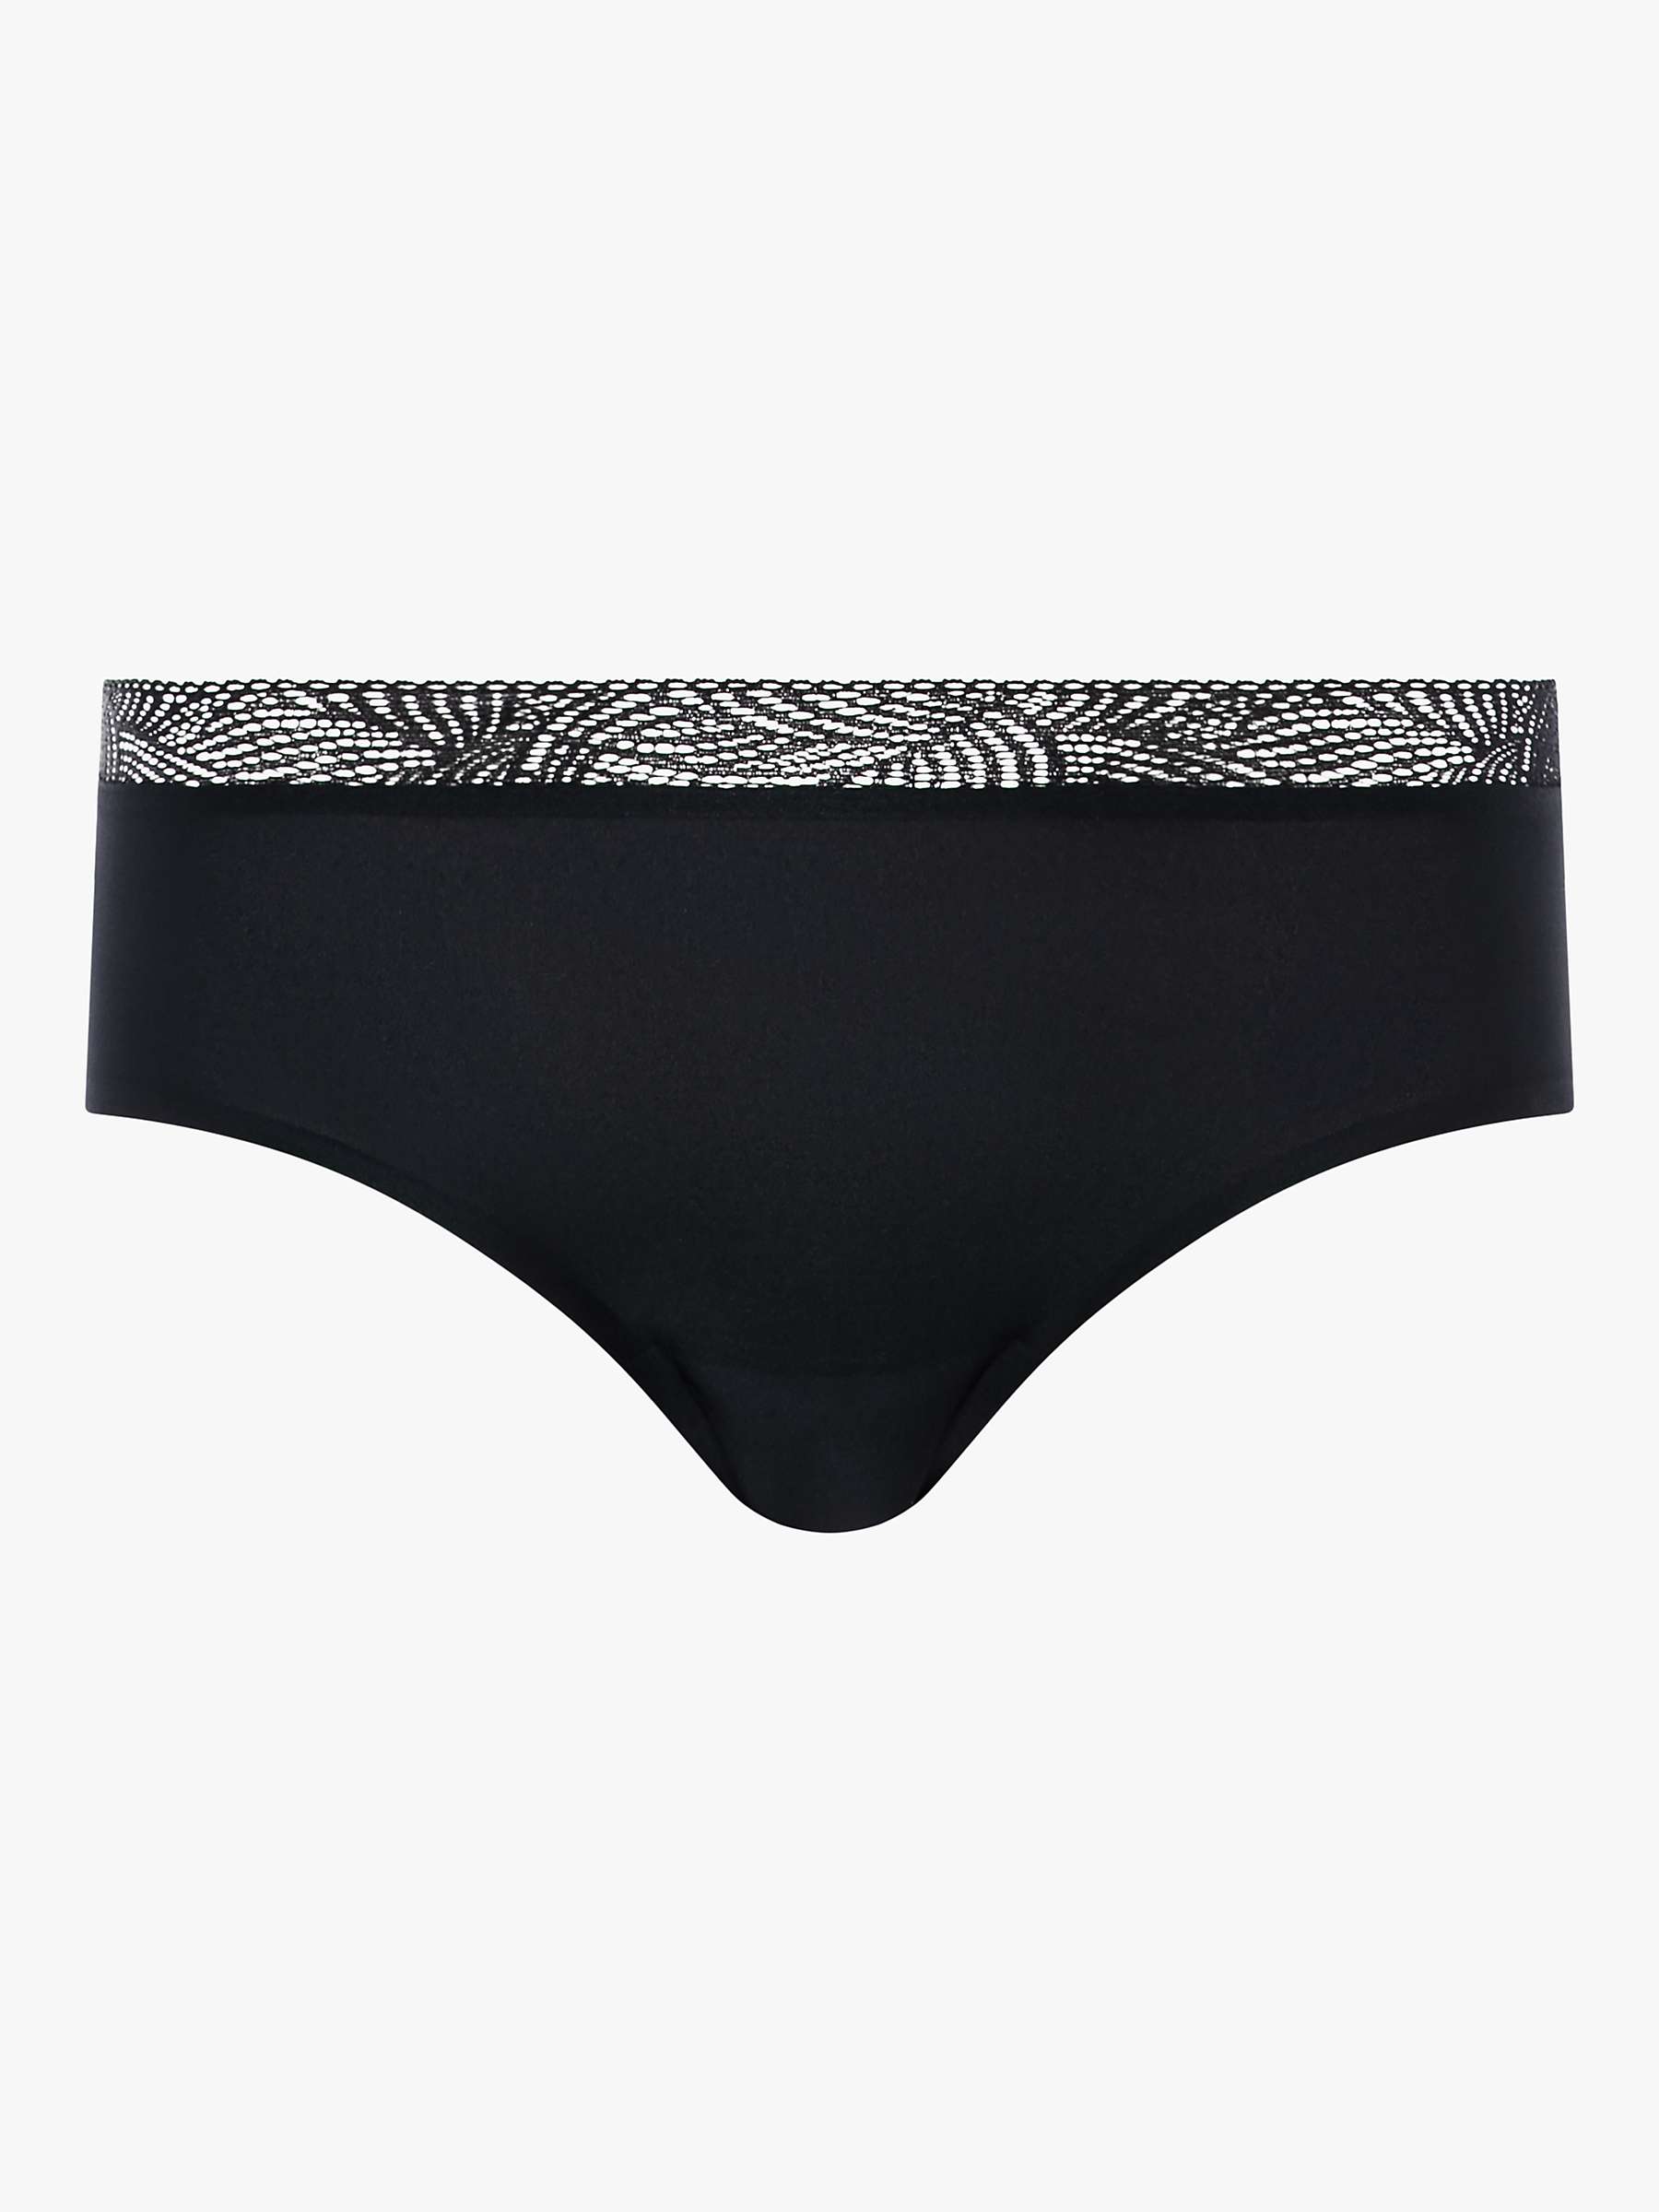 Buy Chantelle Soft Stretch Lace Hipster Knickers Online at johnlewis.com